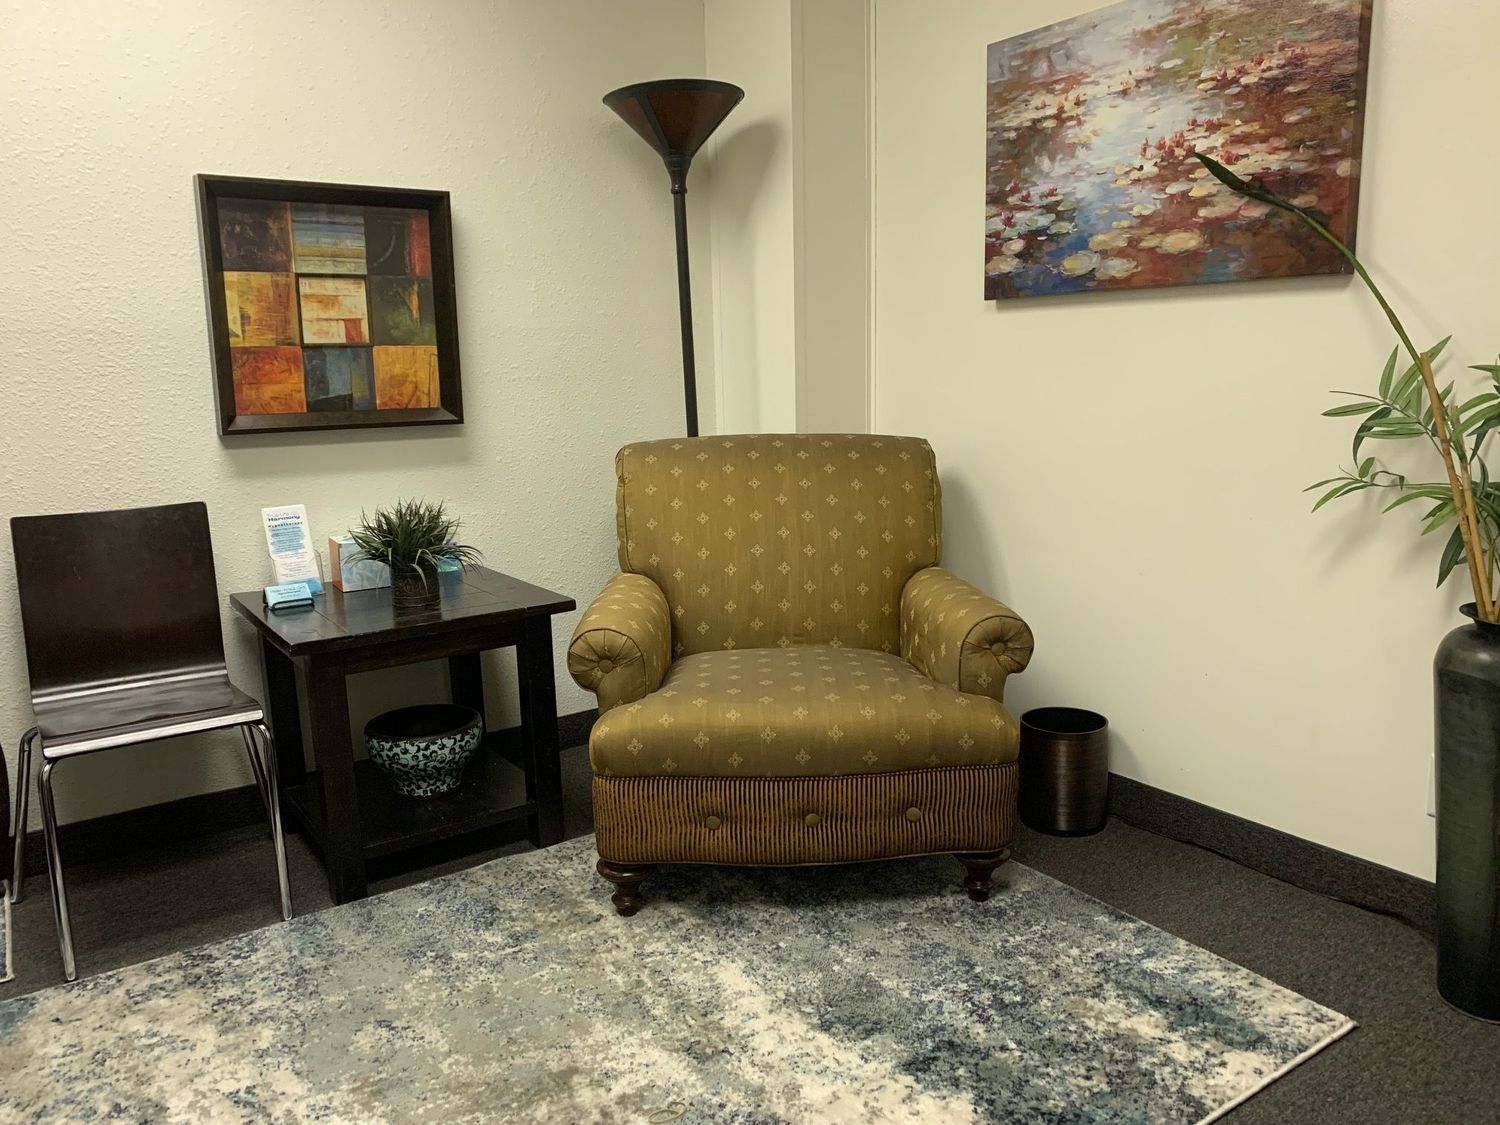 Gallery Photo of To increase your ability to relax and fully participate in your session an inviting office and a comfortable chair are provided for your comfort.